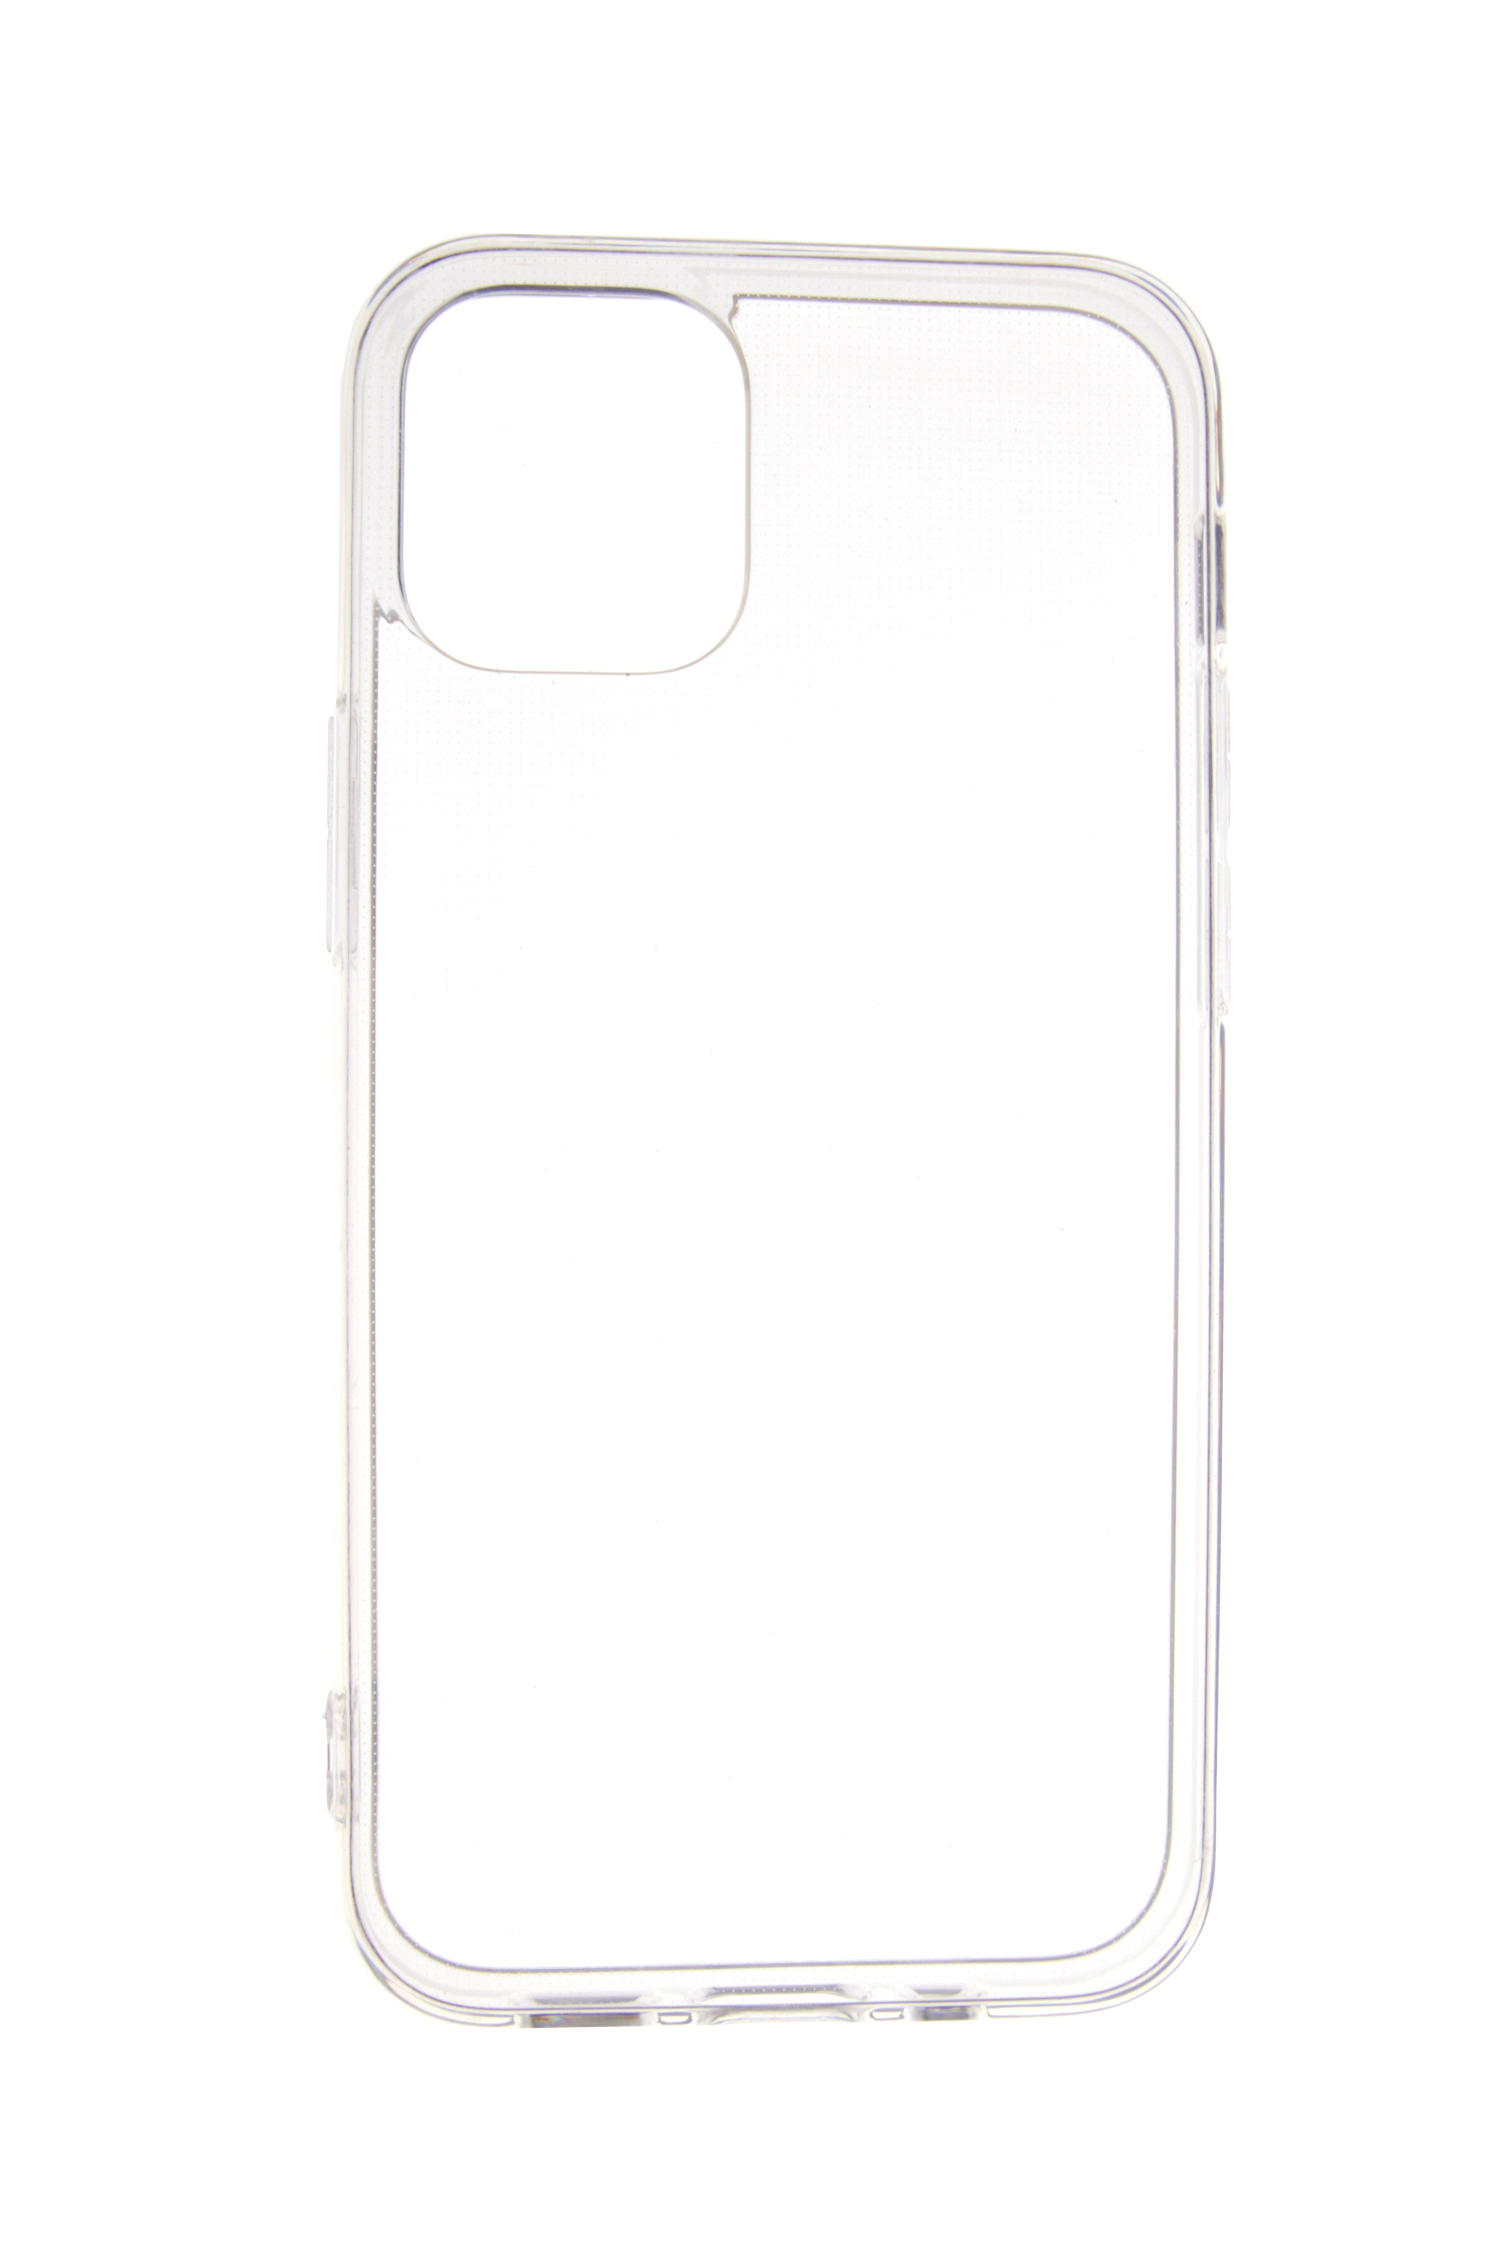 Apple, TPU 1.8 Pro Backcover, JAMCOVER Transparent iPhone Case, 12 mm Max,